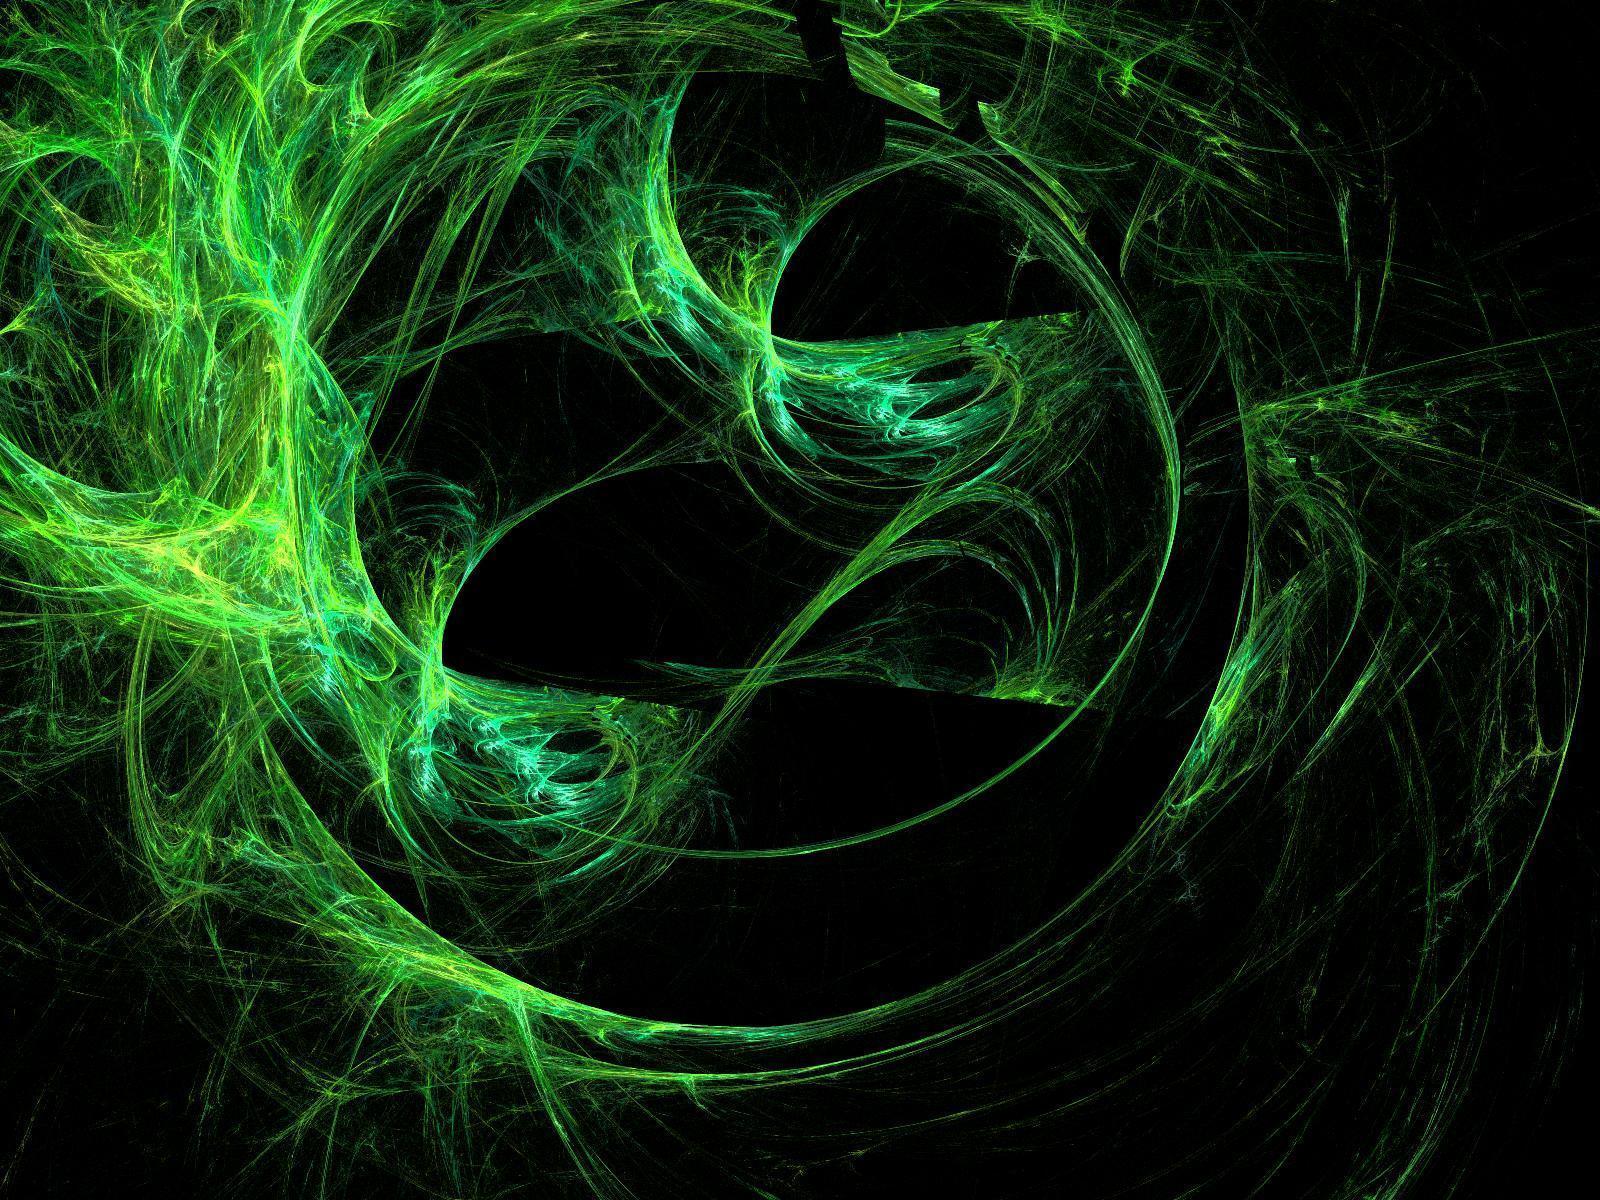 Wallpaper For > Lime Green And Black Background